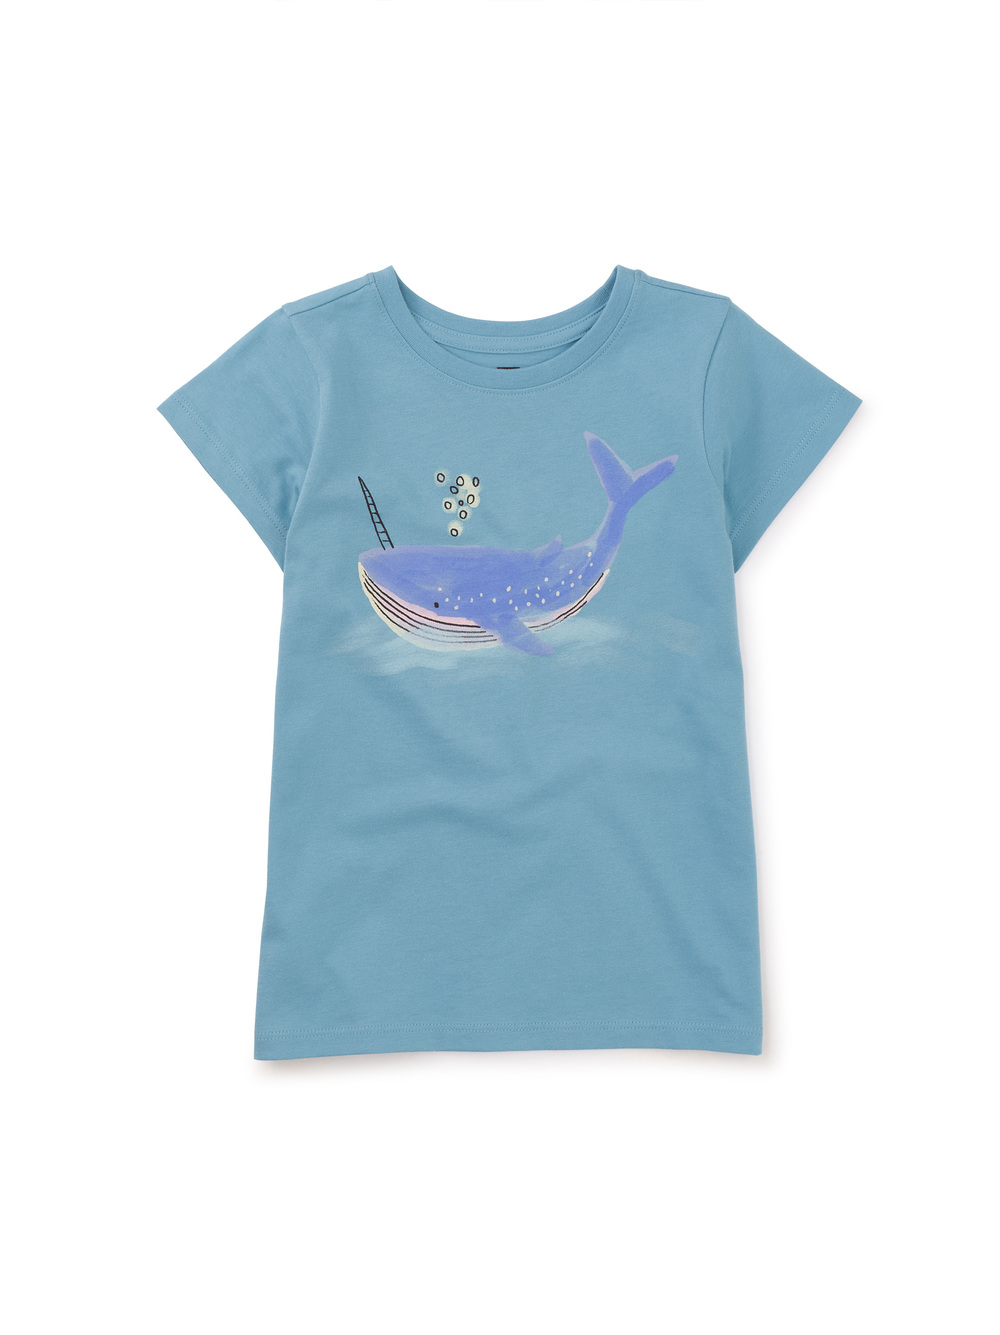 Whale Graphic Tee